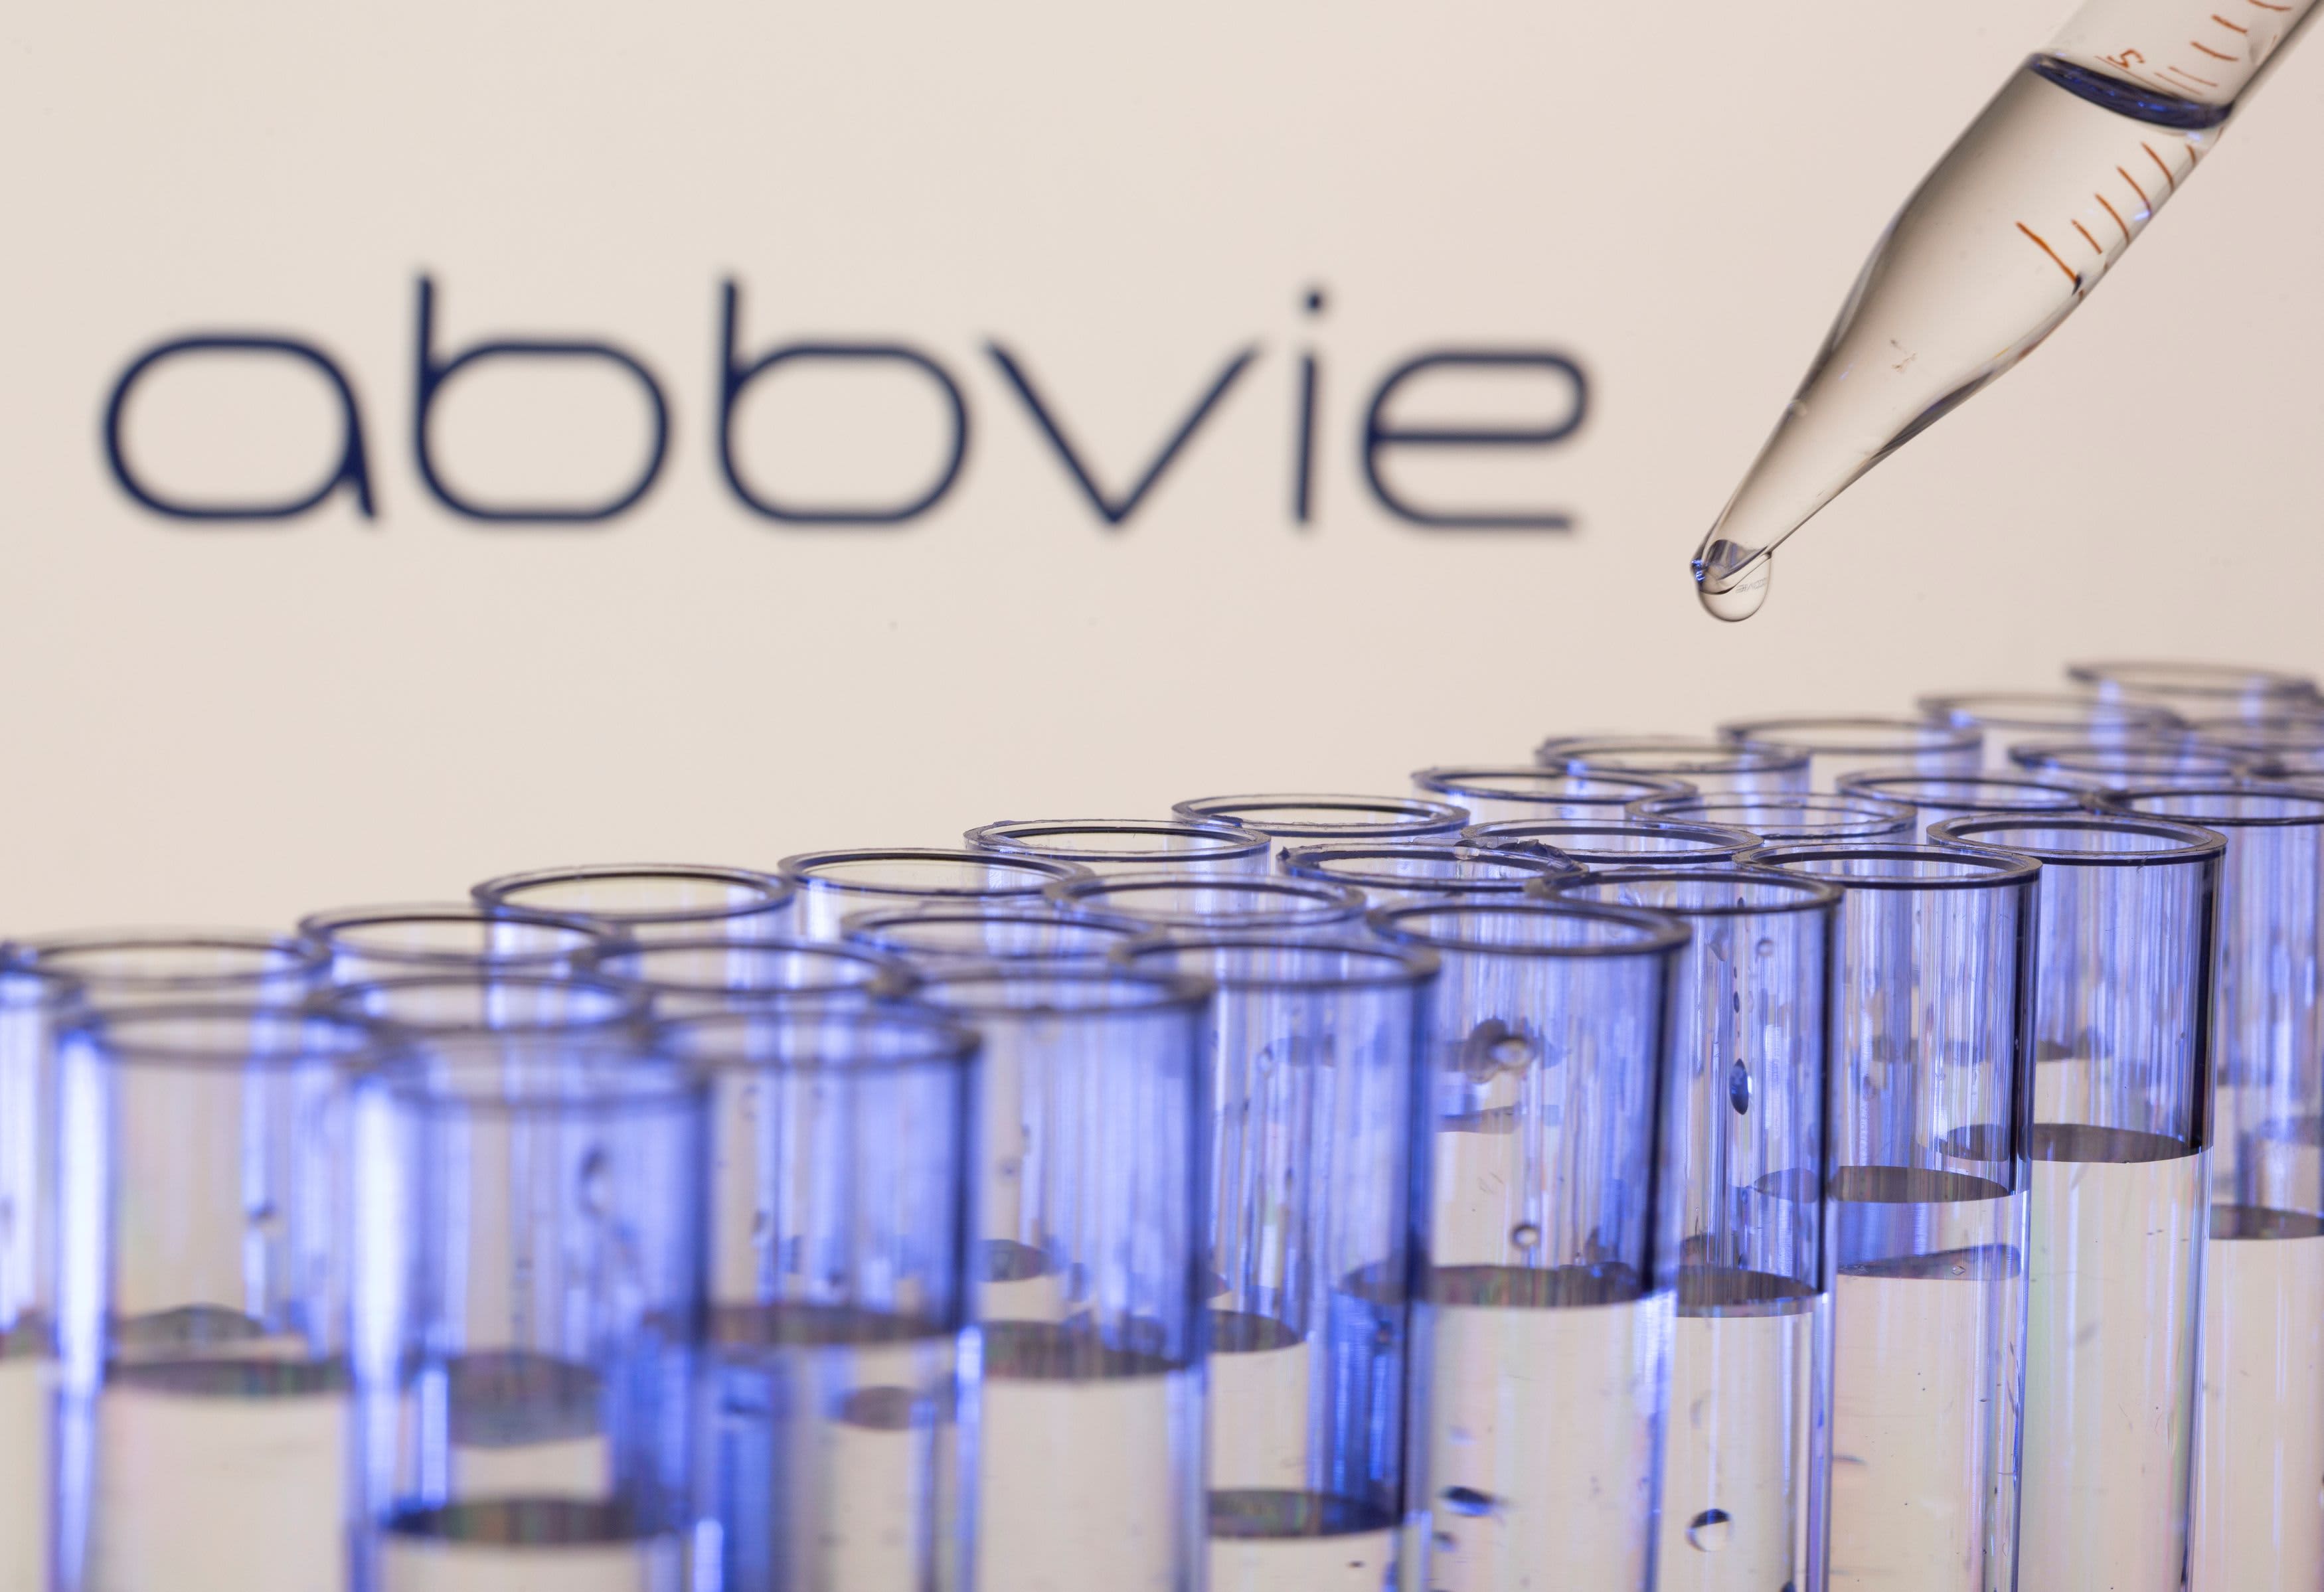 Deciphering AbbVie's Financial Dynamics and Strategic Positioning